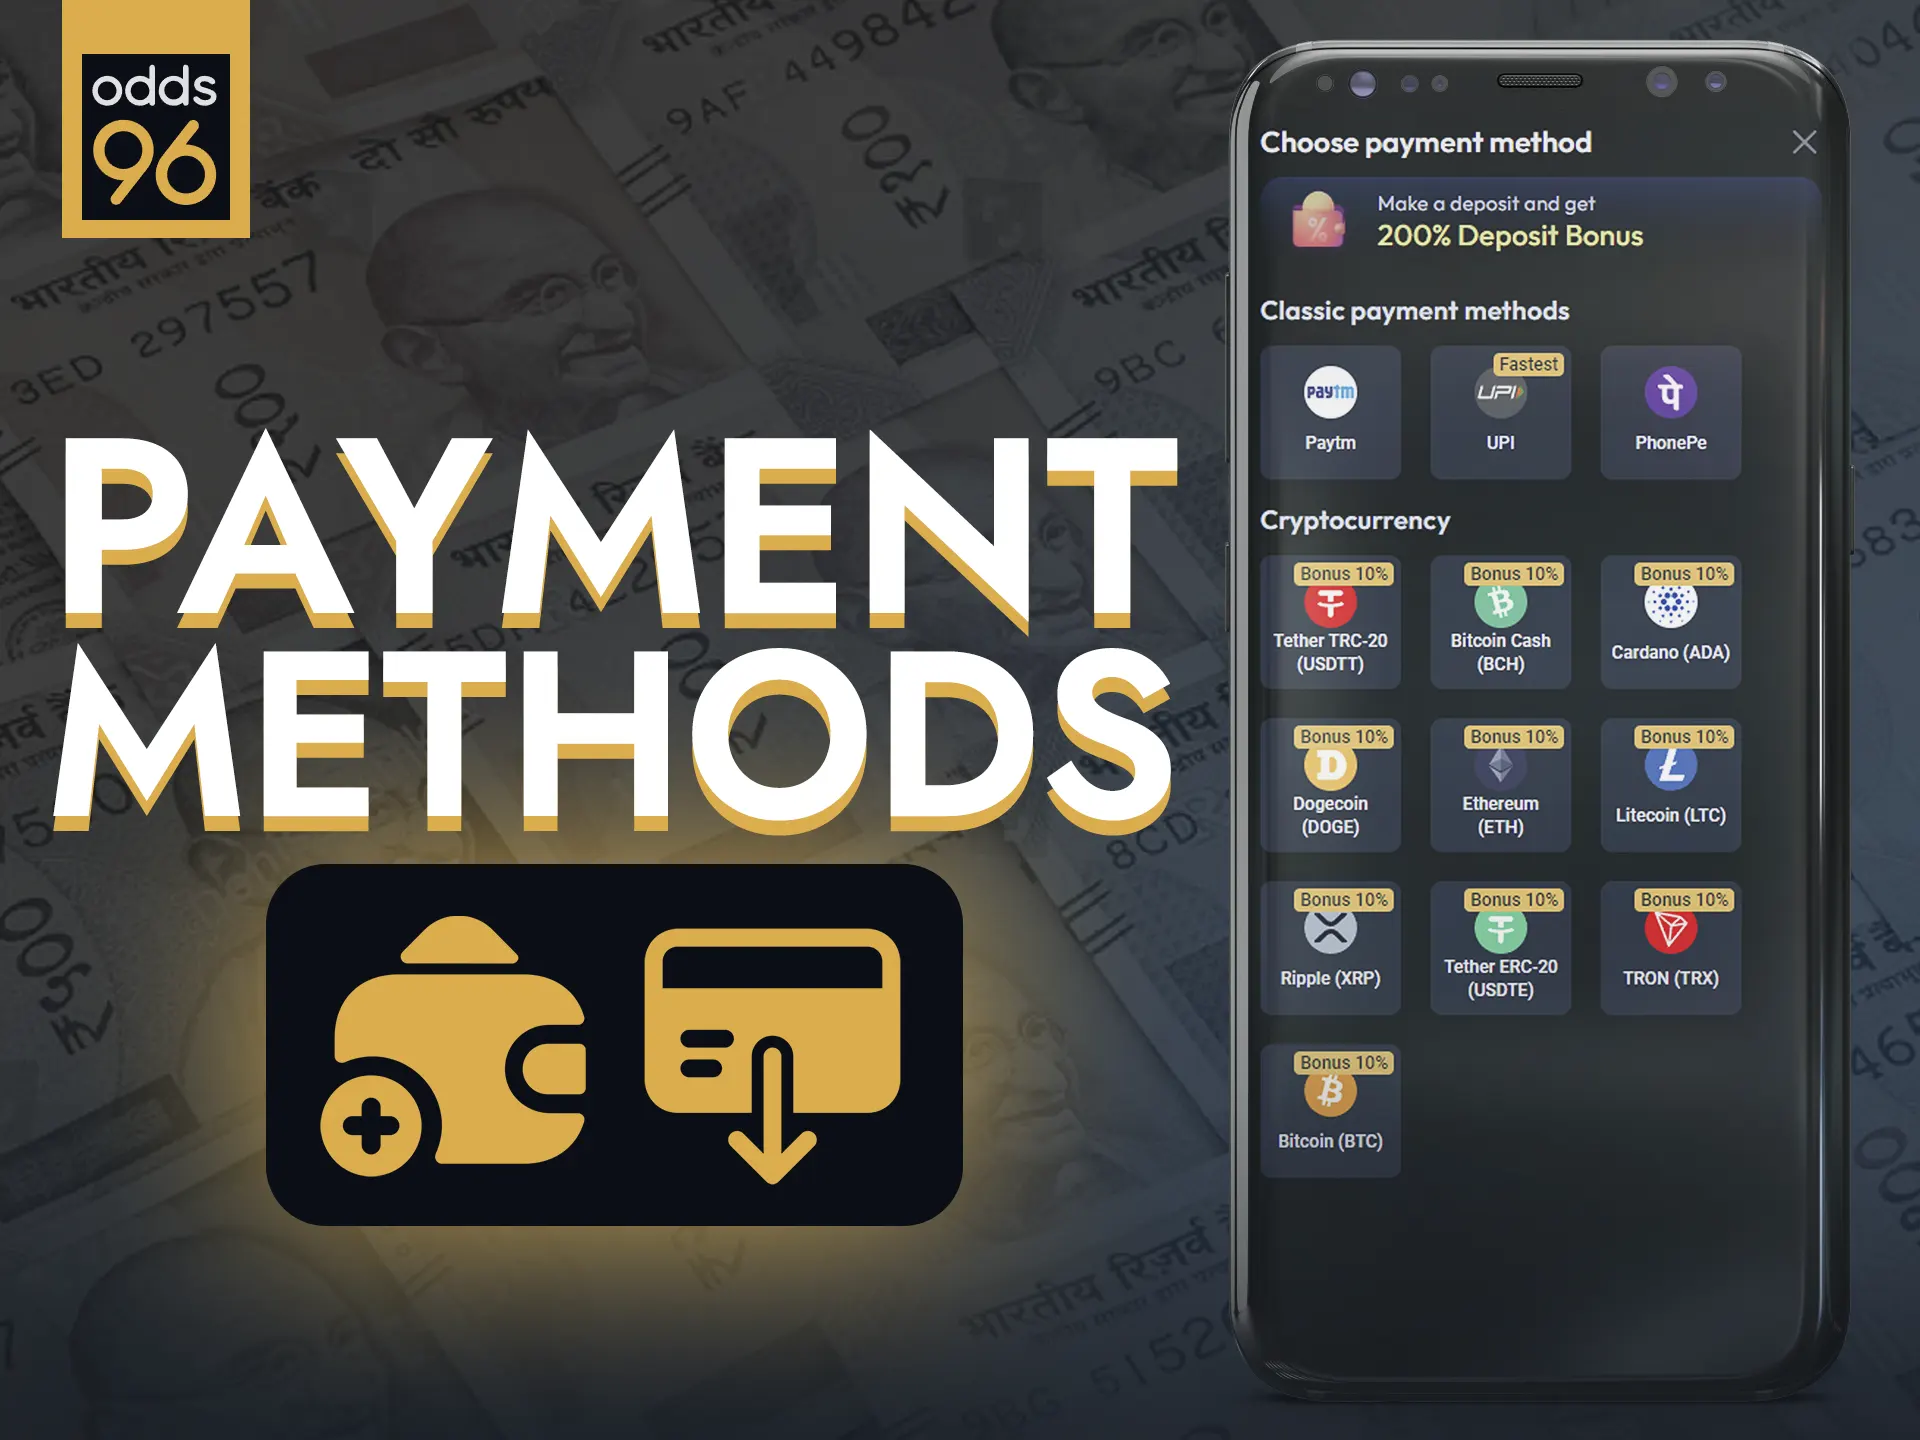 Choose from various payment options in Odds96 app.